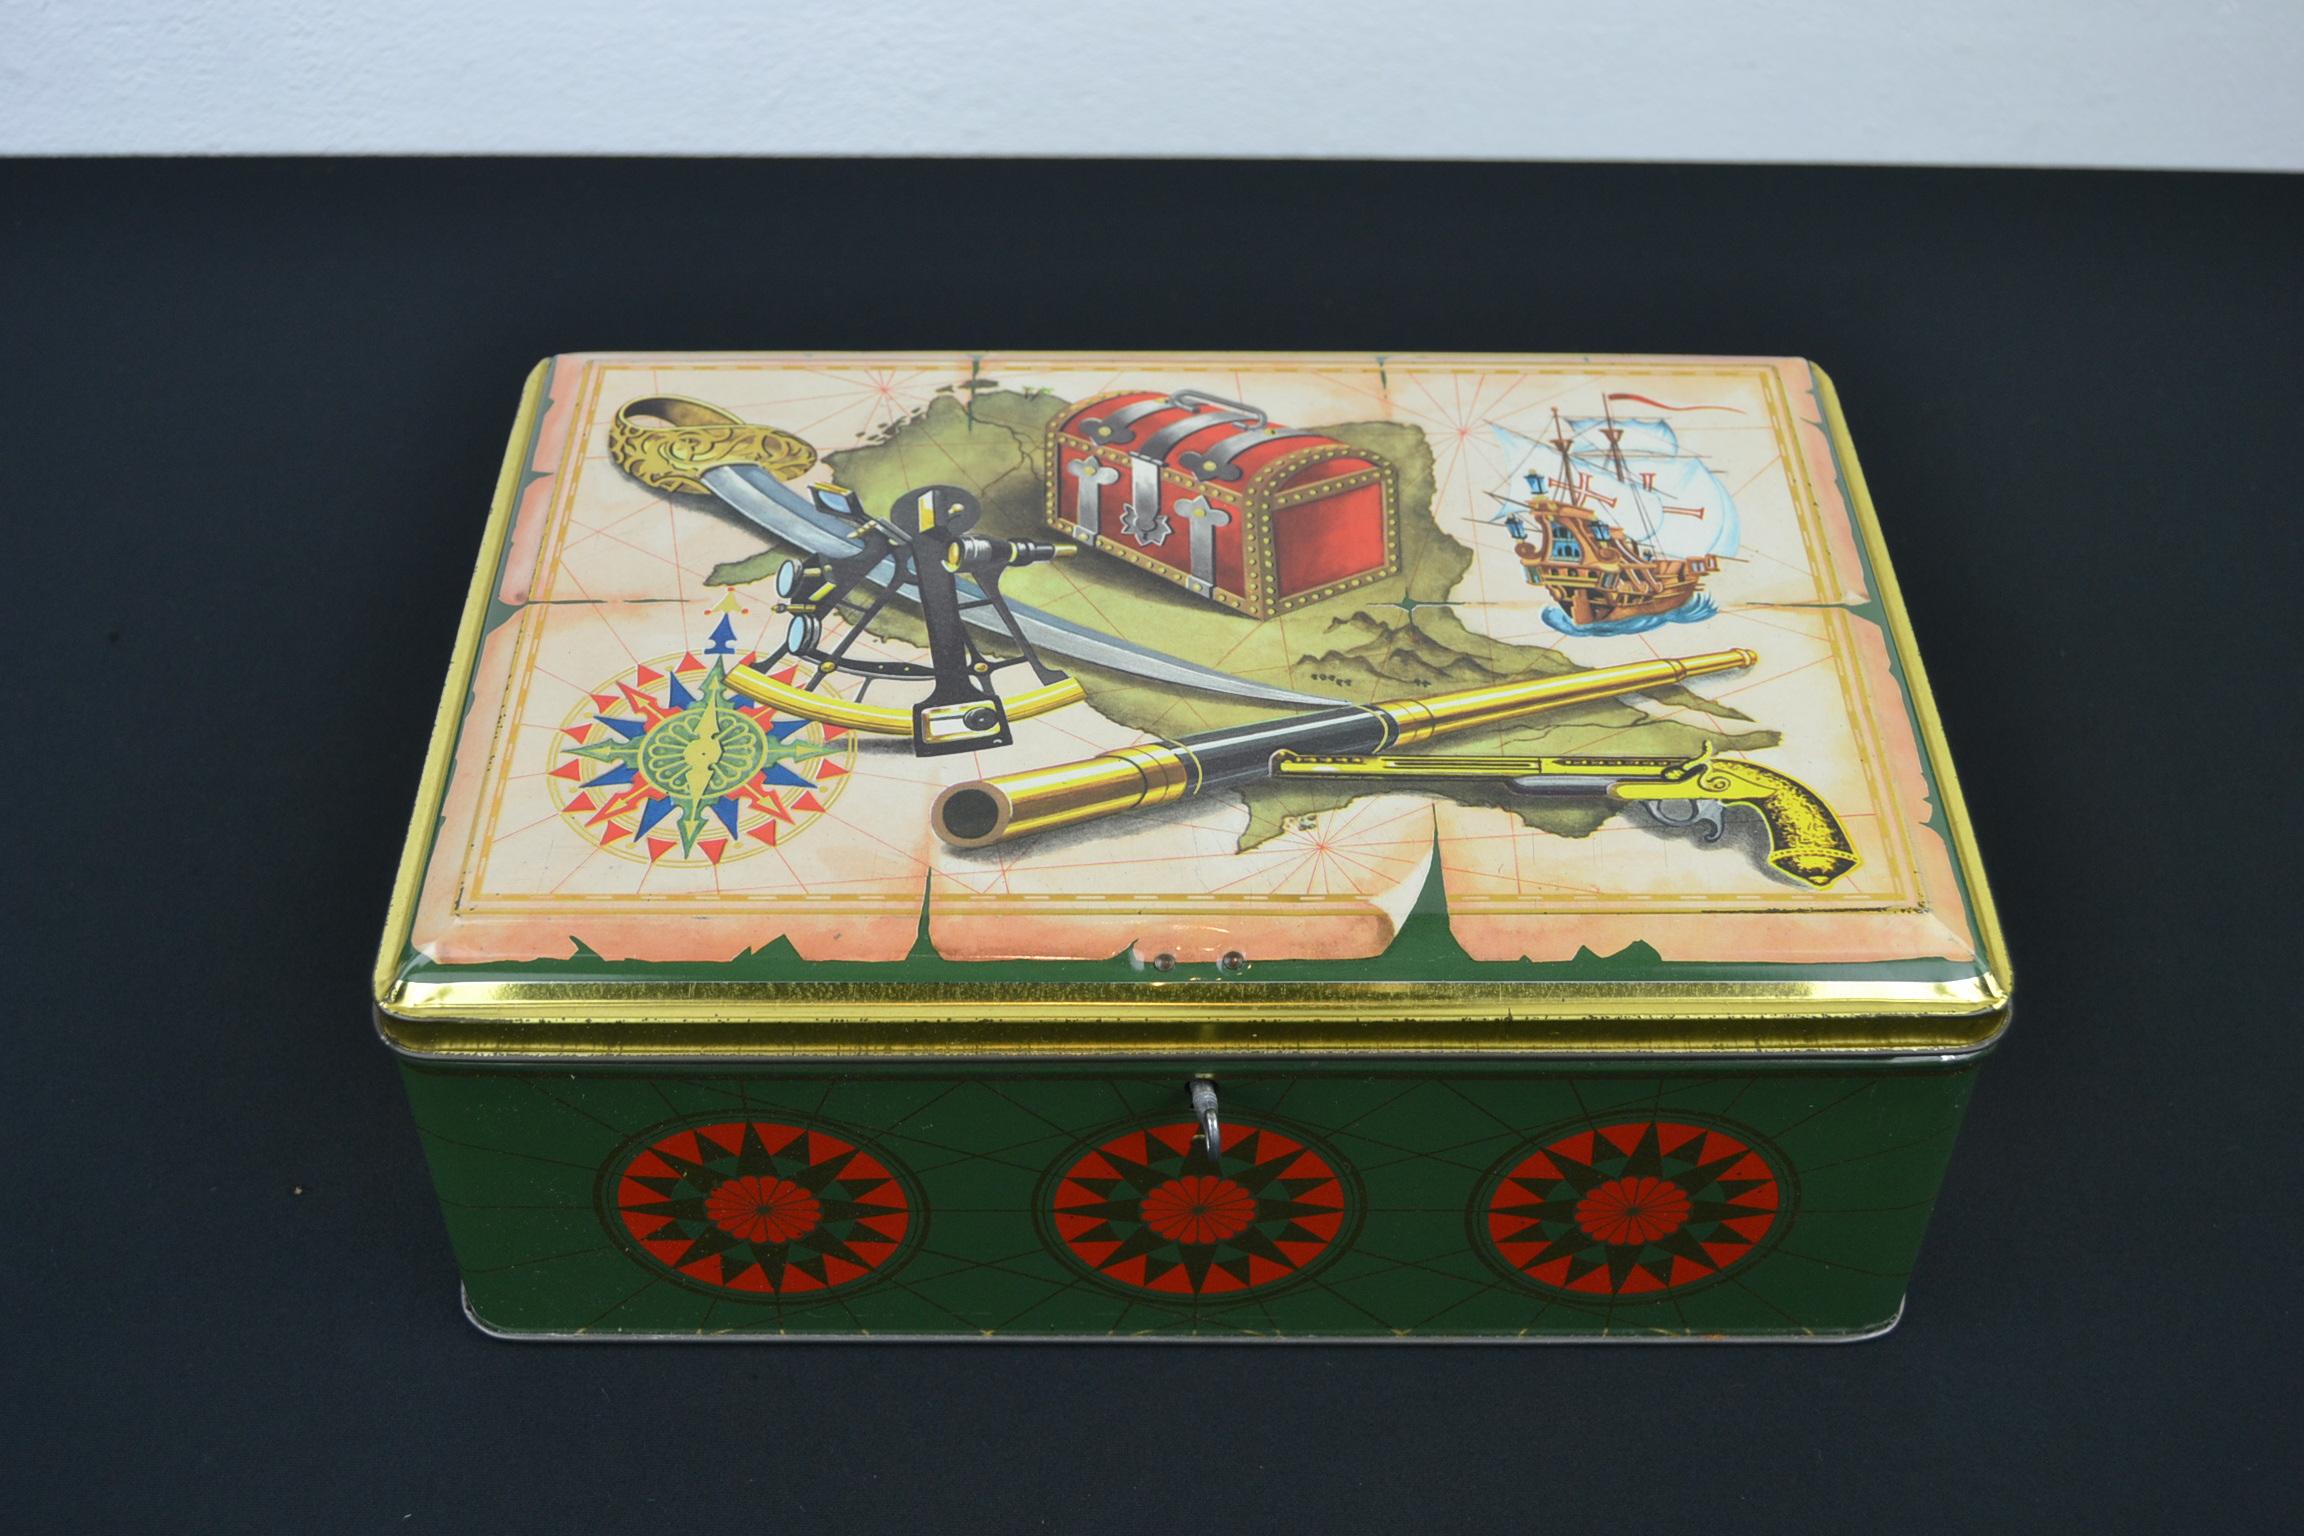 Vintage biscuit tin theme Pirate - Piracy.
This 1950s tin box is a great decorative box or storage box with beautiful design of the material of the sea rover:
pirate ship, a map, compass, binoculars or telescope, pistol, sword, location of the